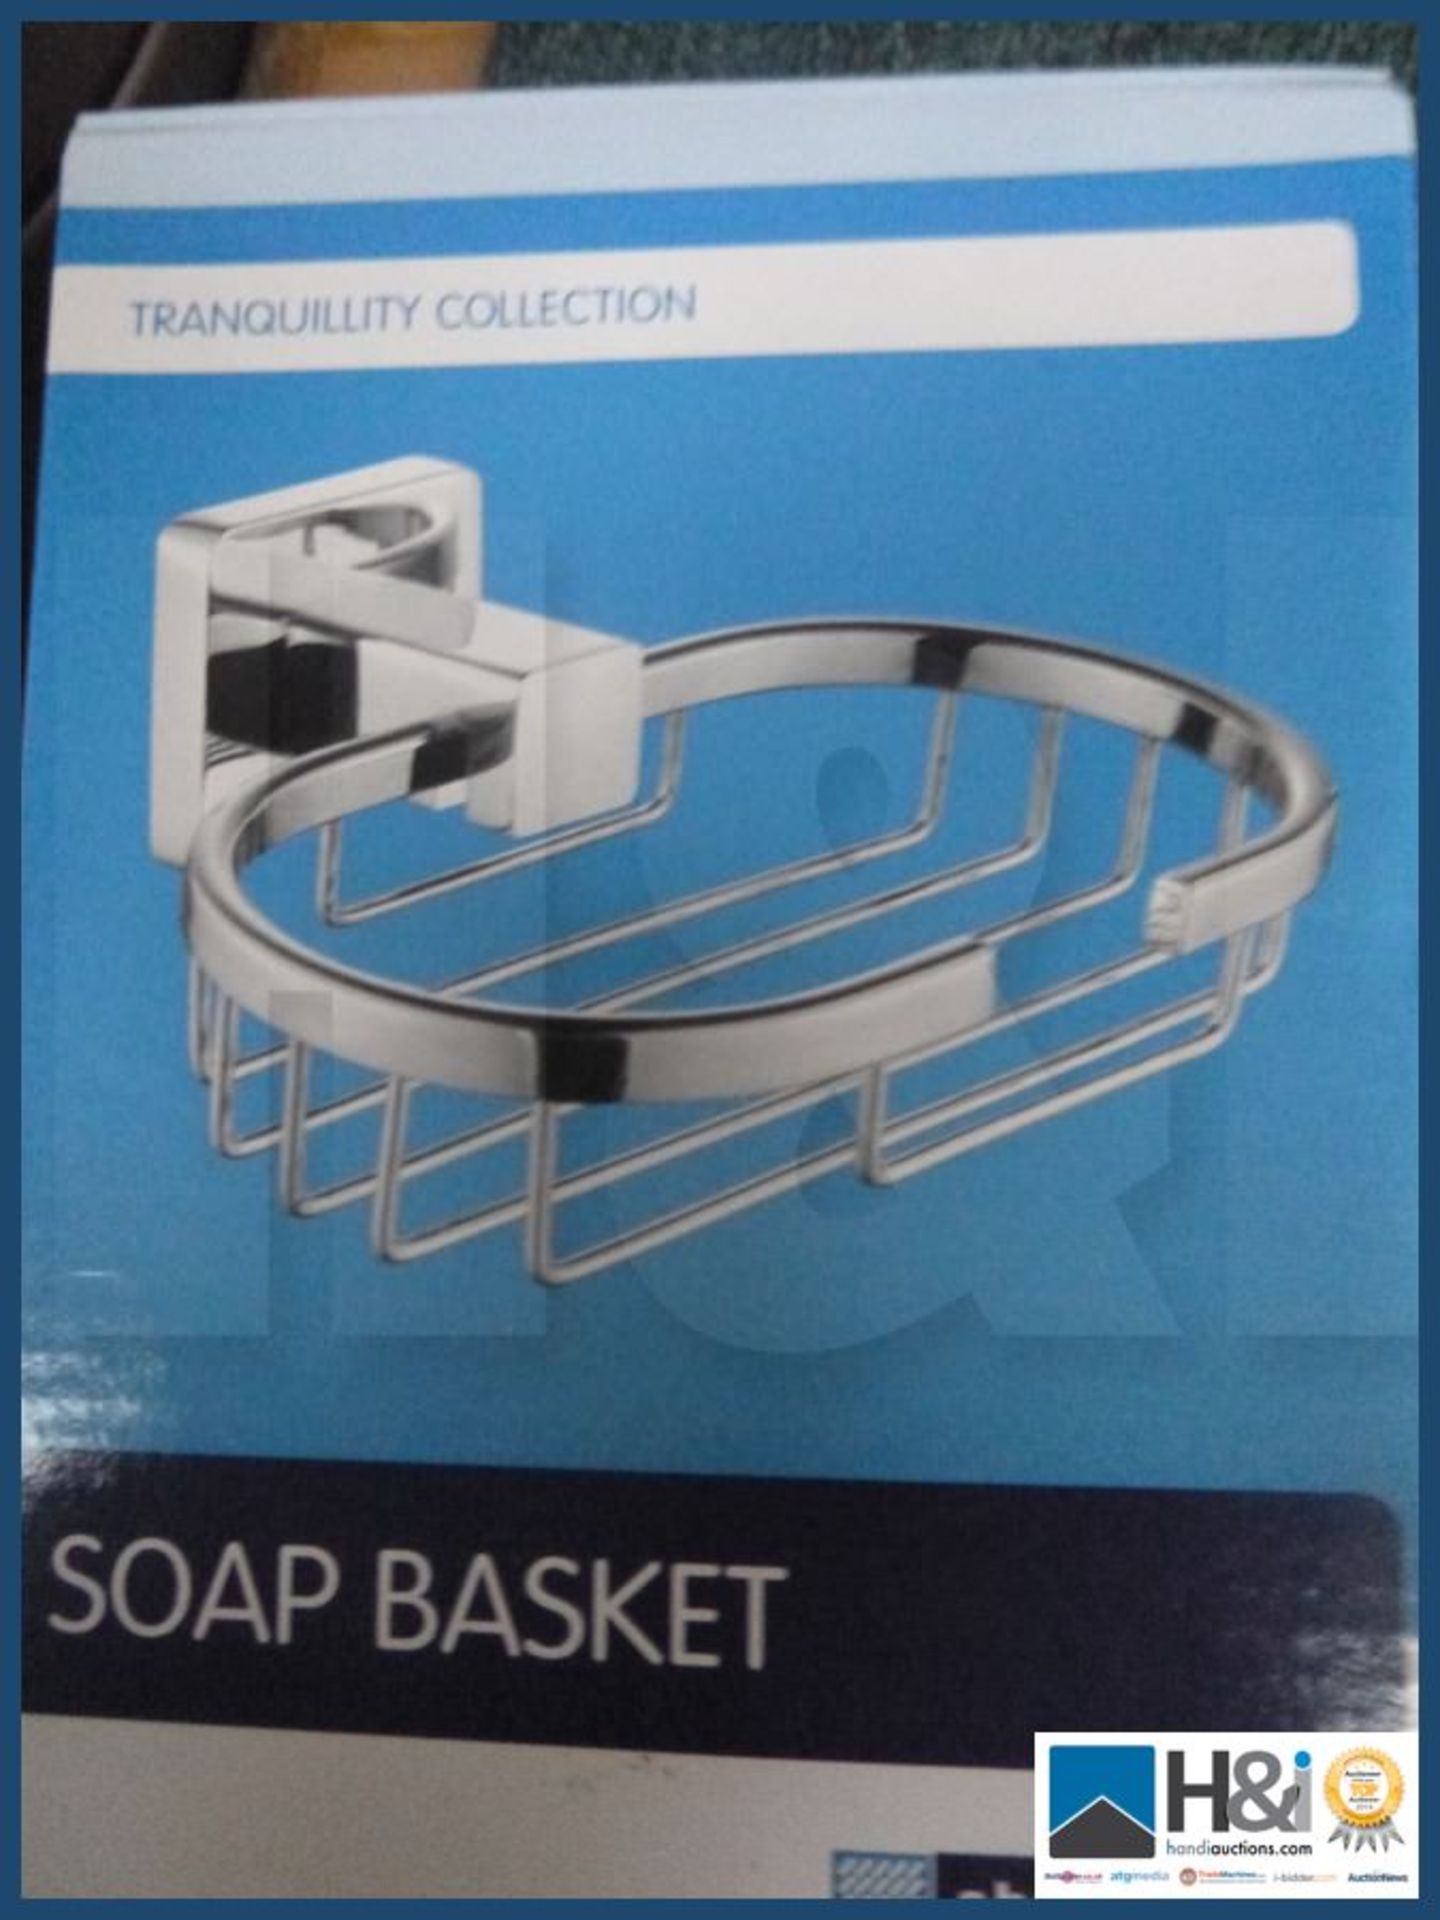 Showerdrape Tranquility collection soap basket Chrome finish RRP 20 GBP.